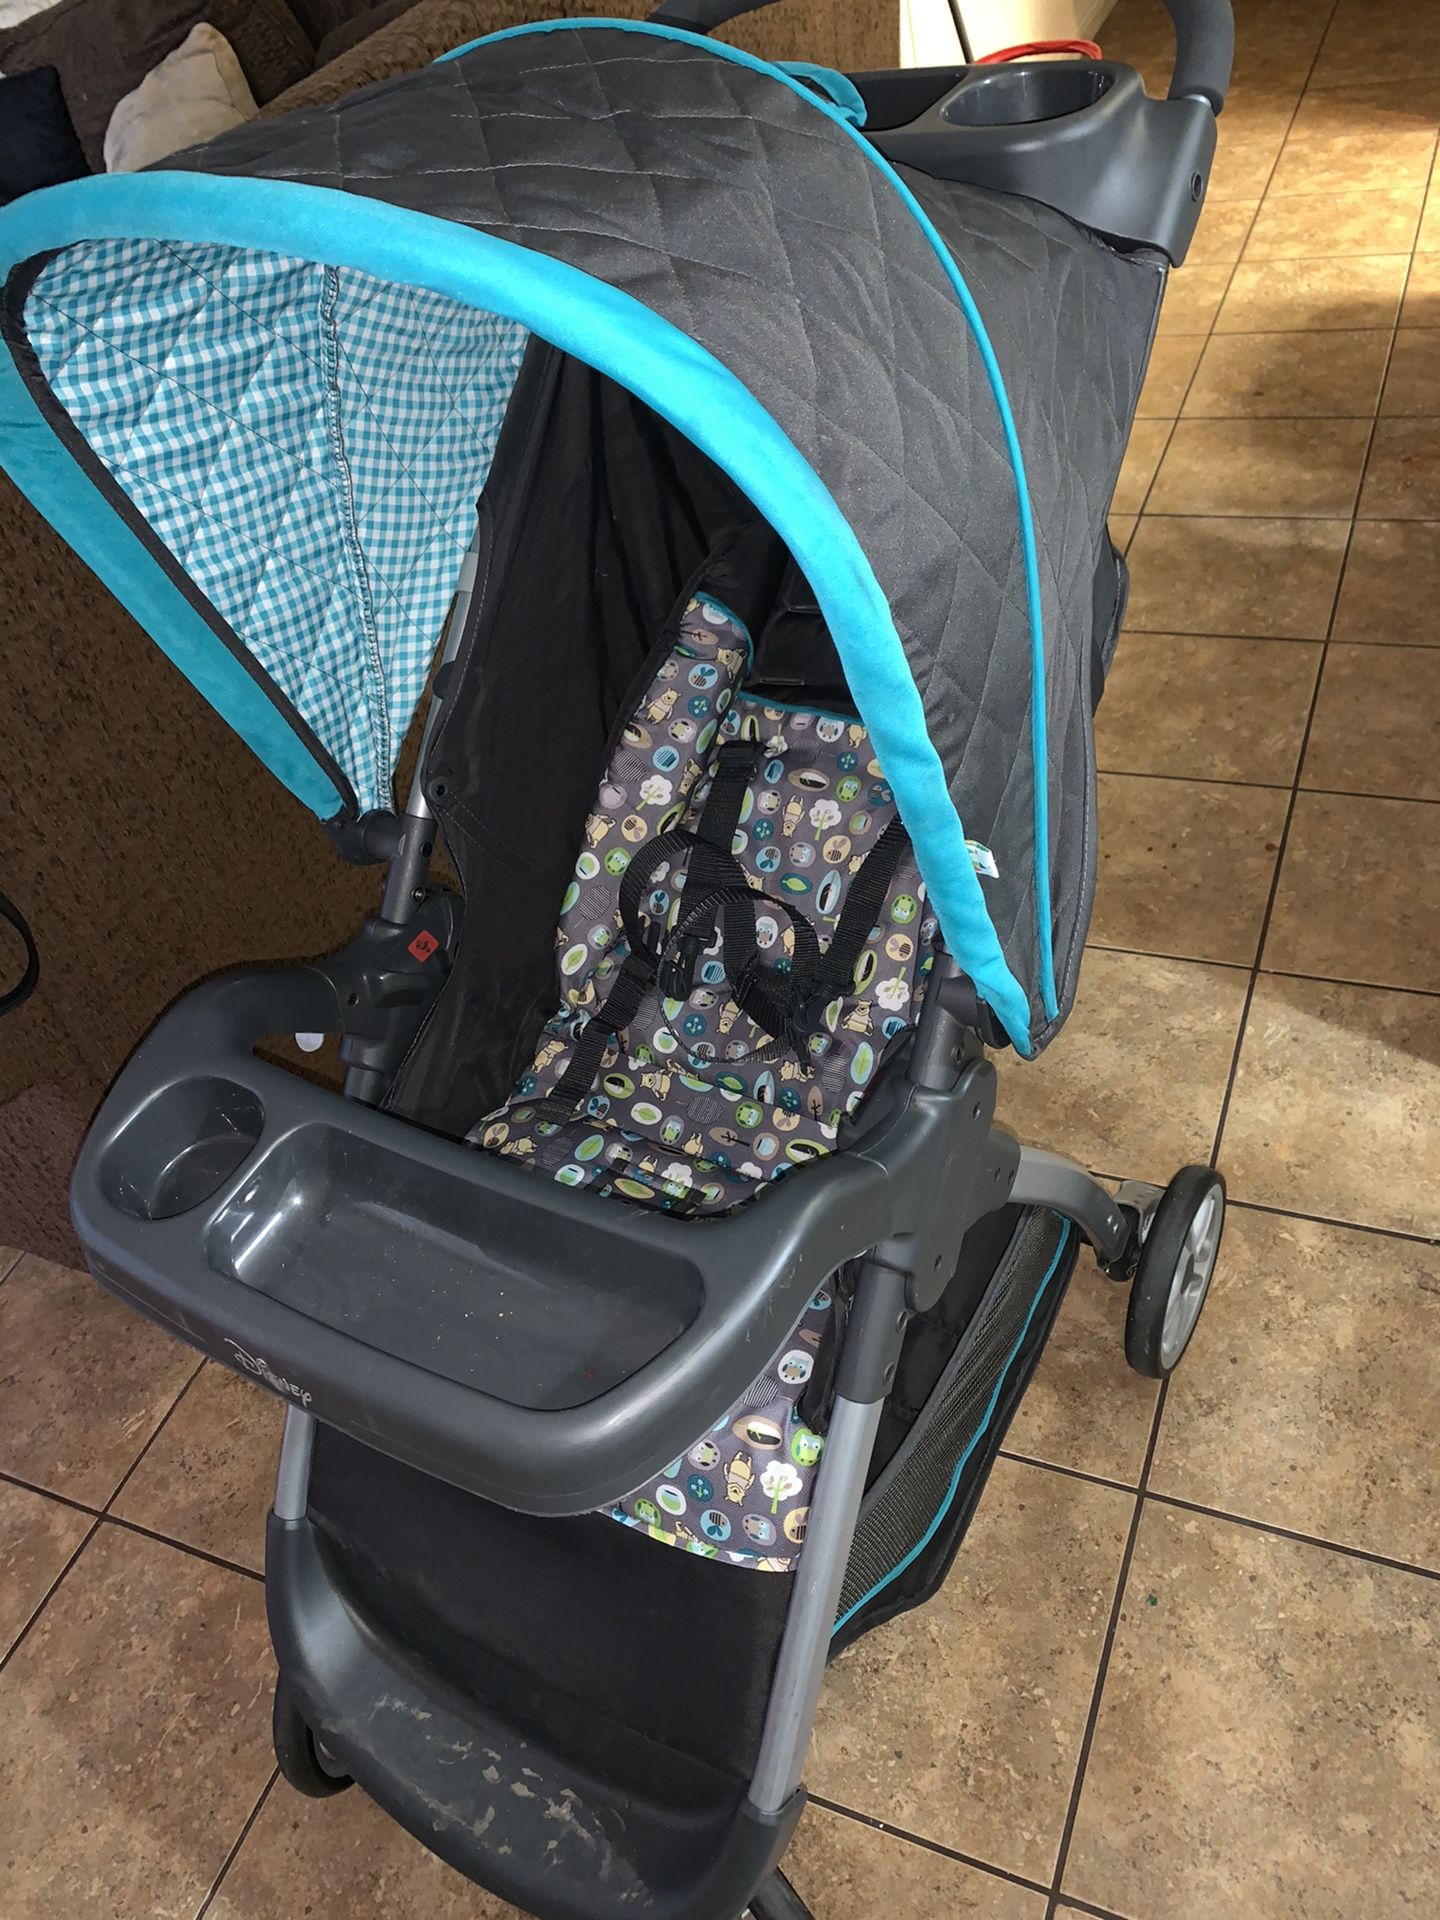 Fairly Used Stroller and Car seat set